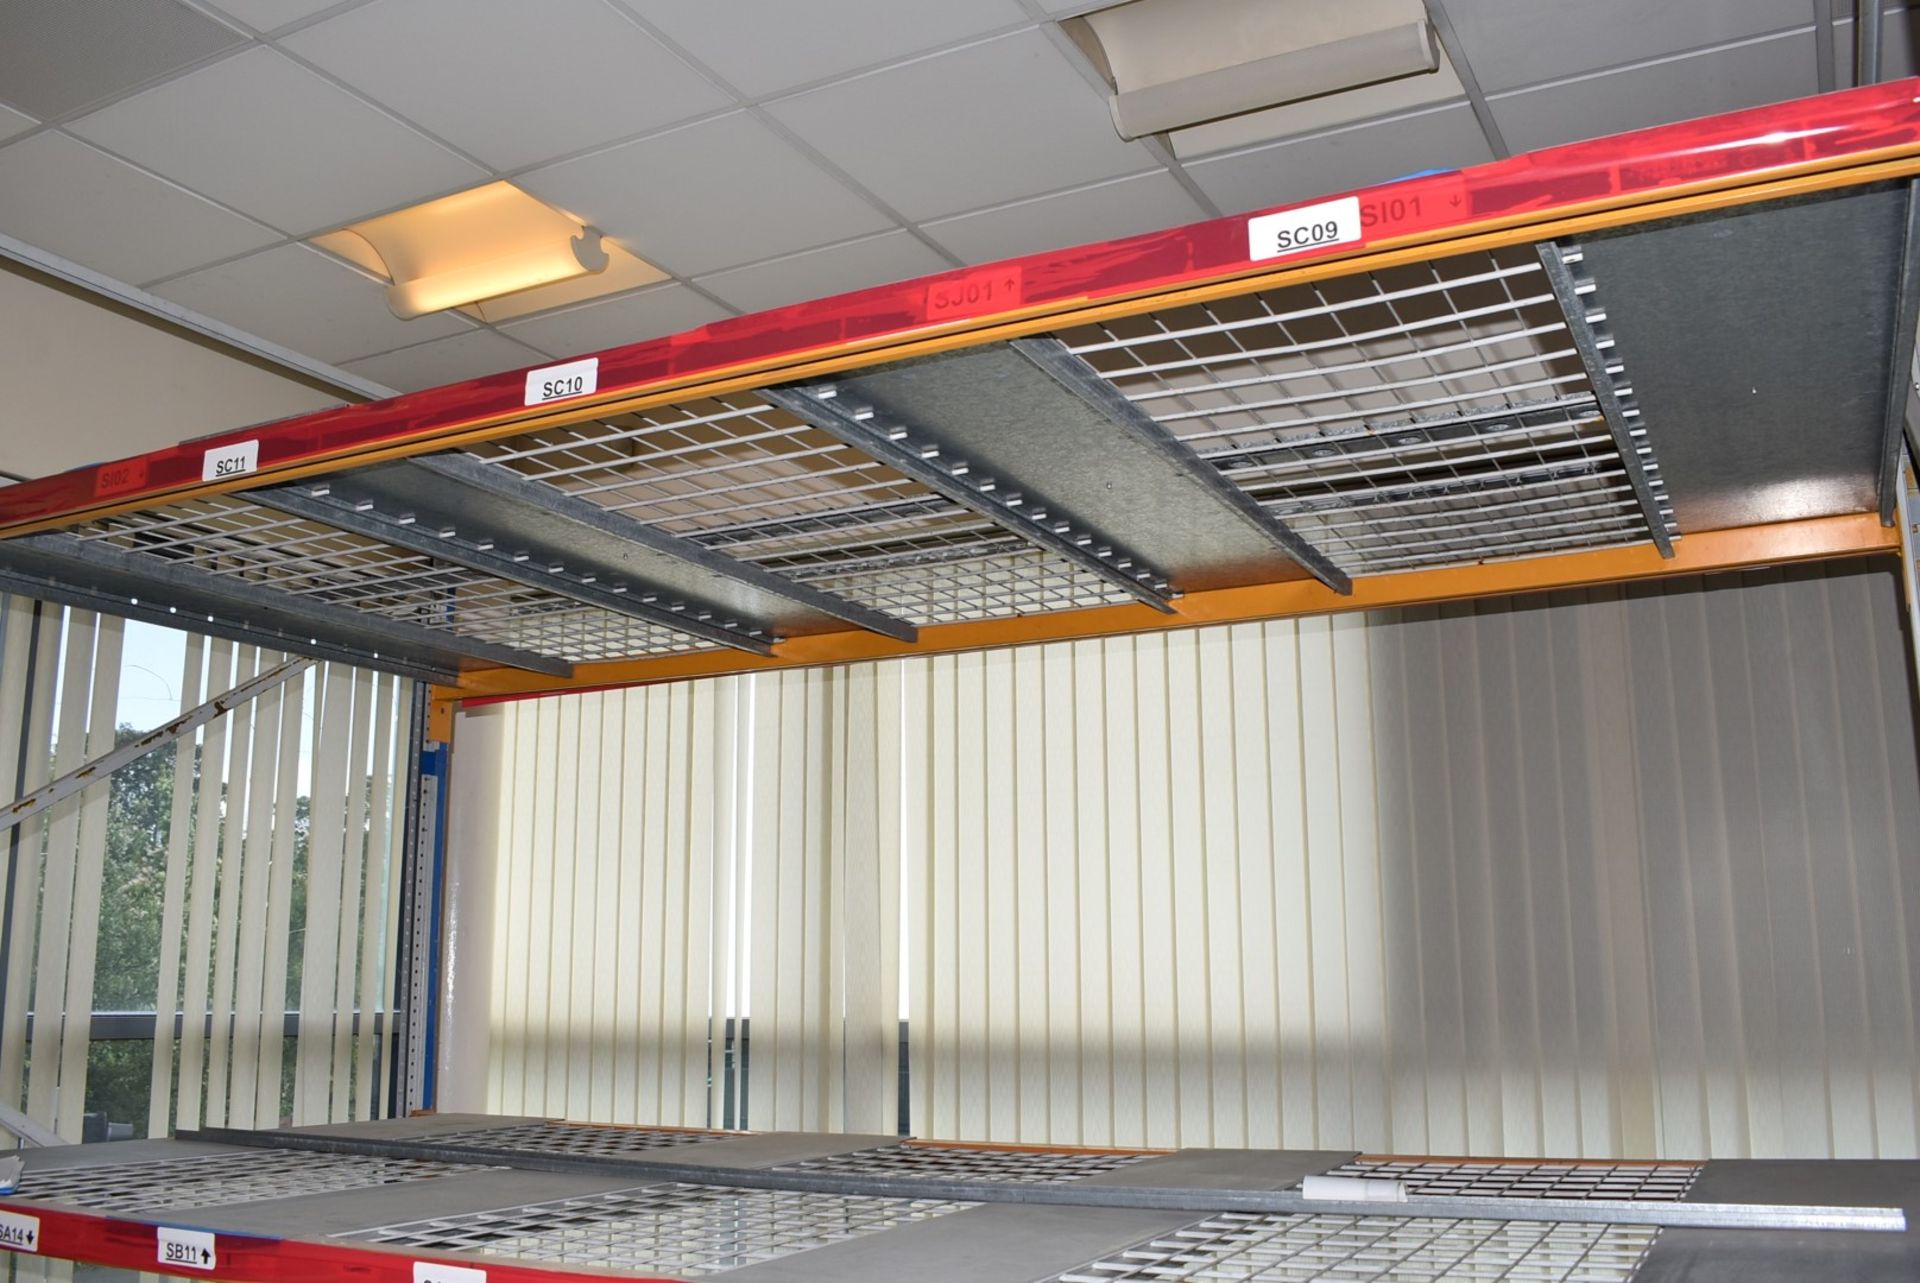 3 x Bays of Heavy Duty Storage Racking With Shelves - Includes 4 x Uprights, 12 x Crossbeams - Image 4 of 7